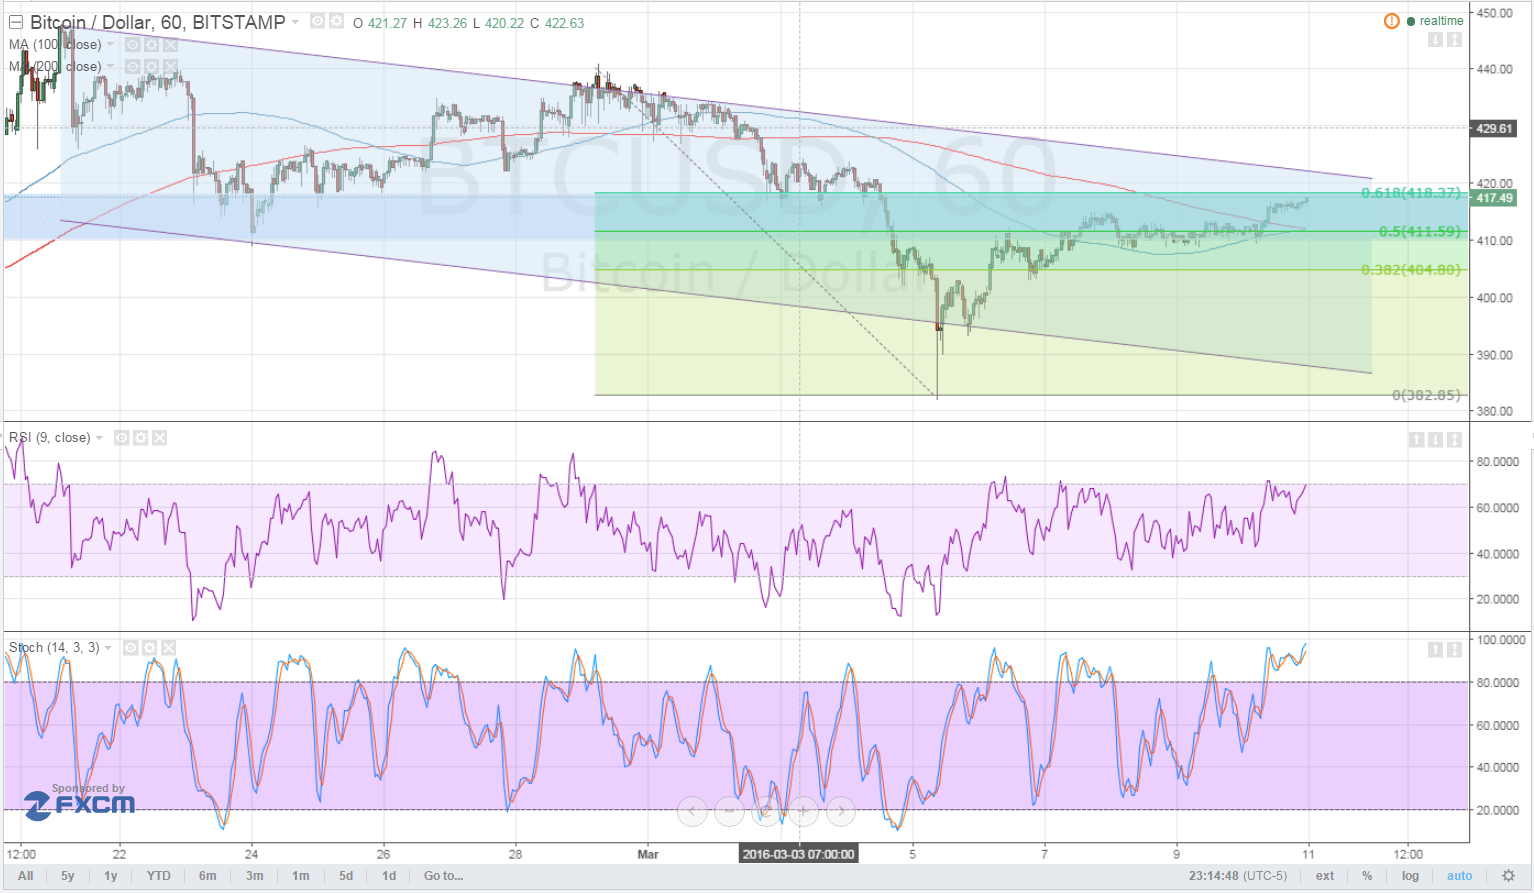 Bitcoin Price Technical Analysis for 03/11/2016 - Eyes on Channel Resistance!